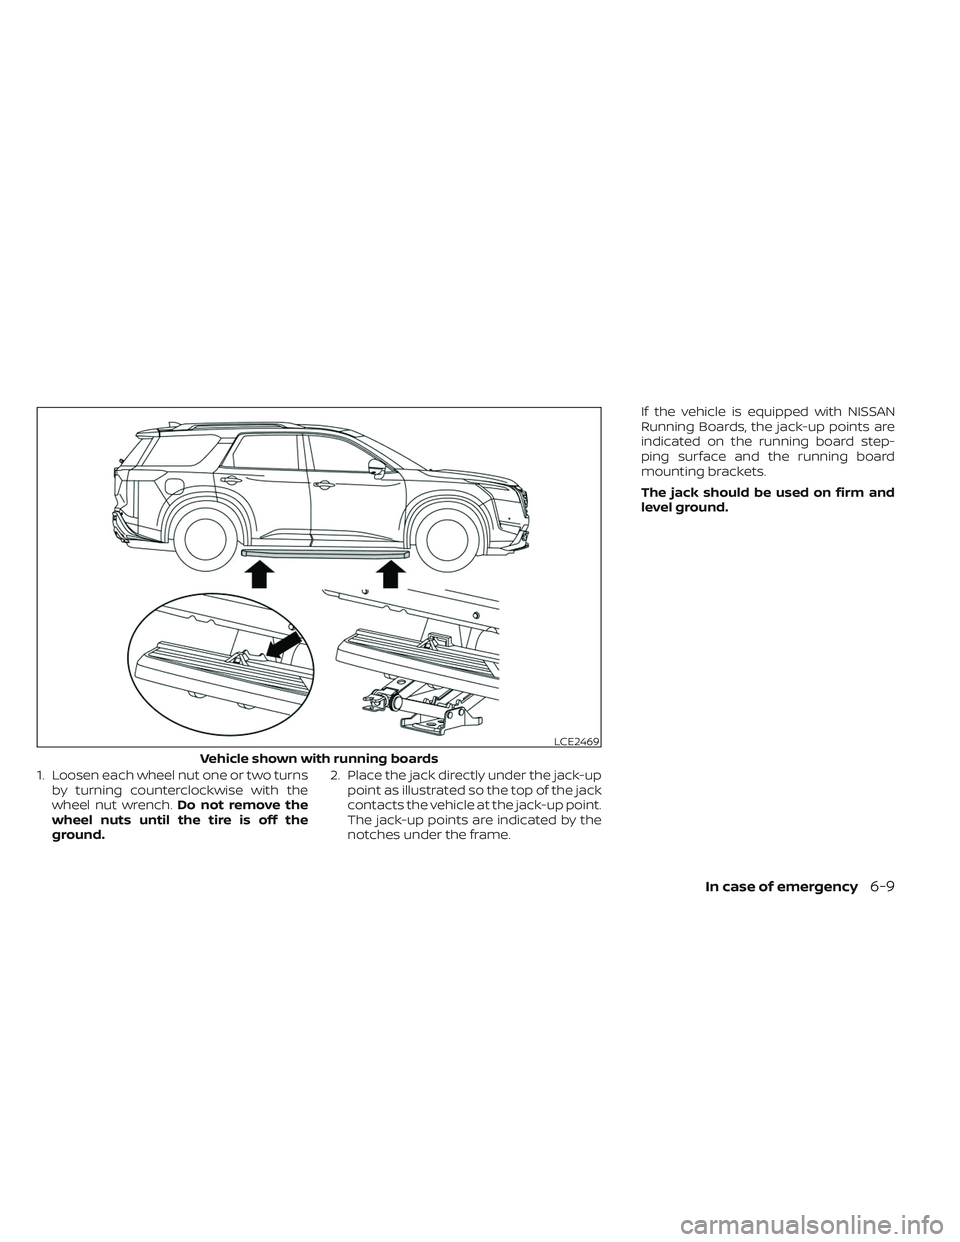 NISSAN PATHFINDER 2022  Owner´s Manual 1. Loosen each wheel nut one or two turnsby turning counterclockwise with the
wheel nut wrench. Do not remove the
wheel nuts until the tire is off the
ground. 2. Place the jack directly under the jack